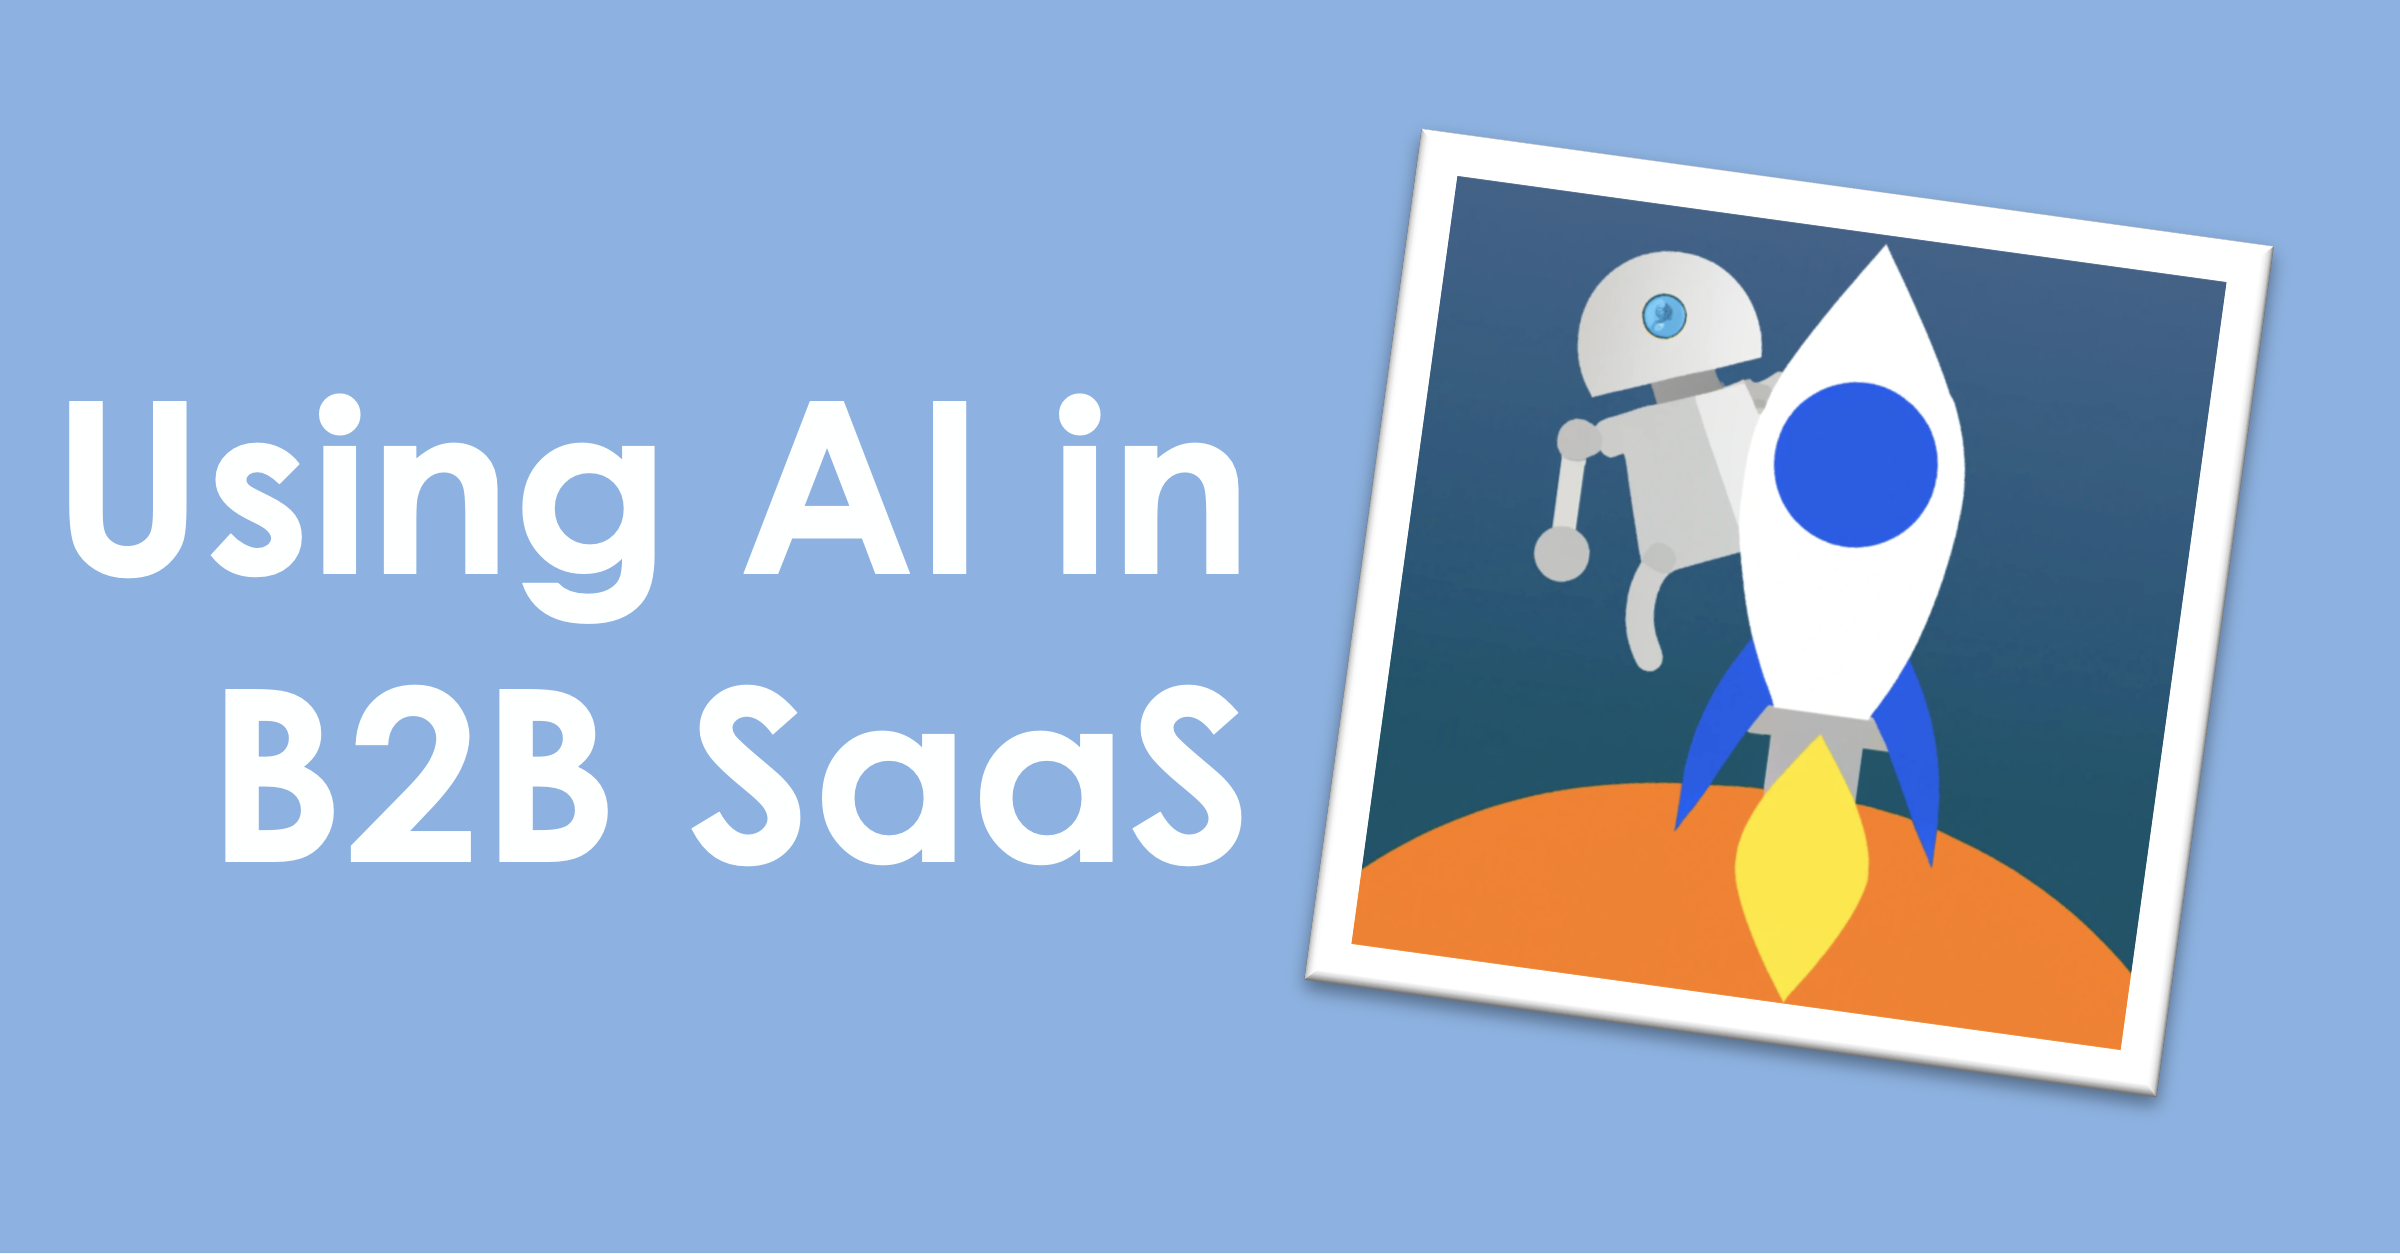 Using AI in B2B SaaS: It’s All About Business Processes!